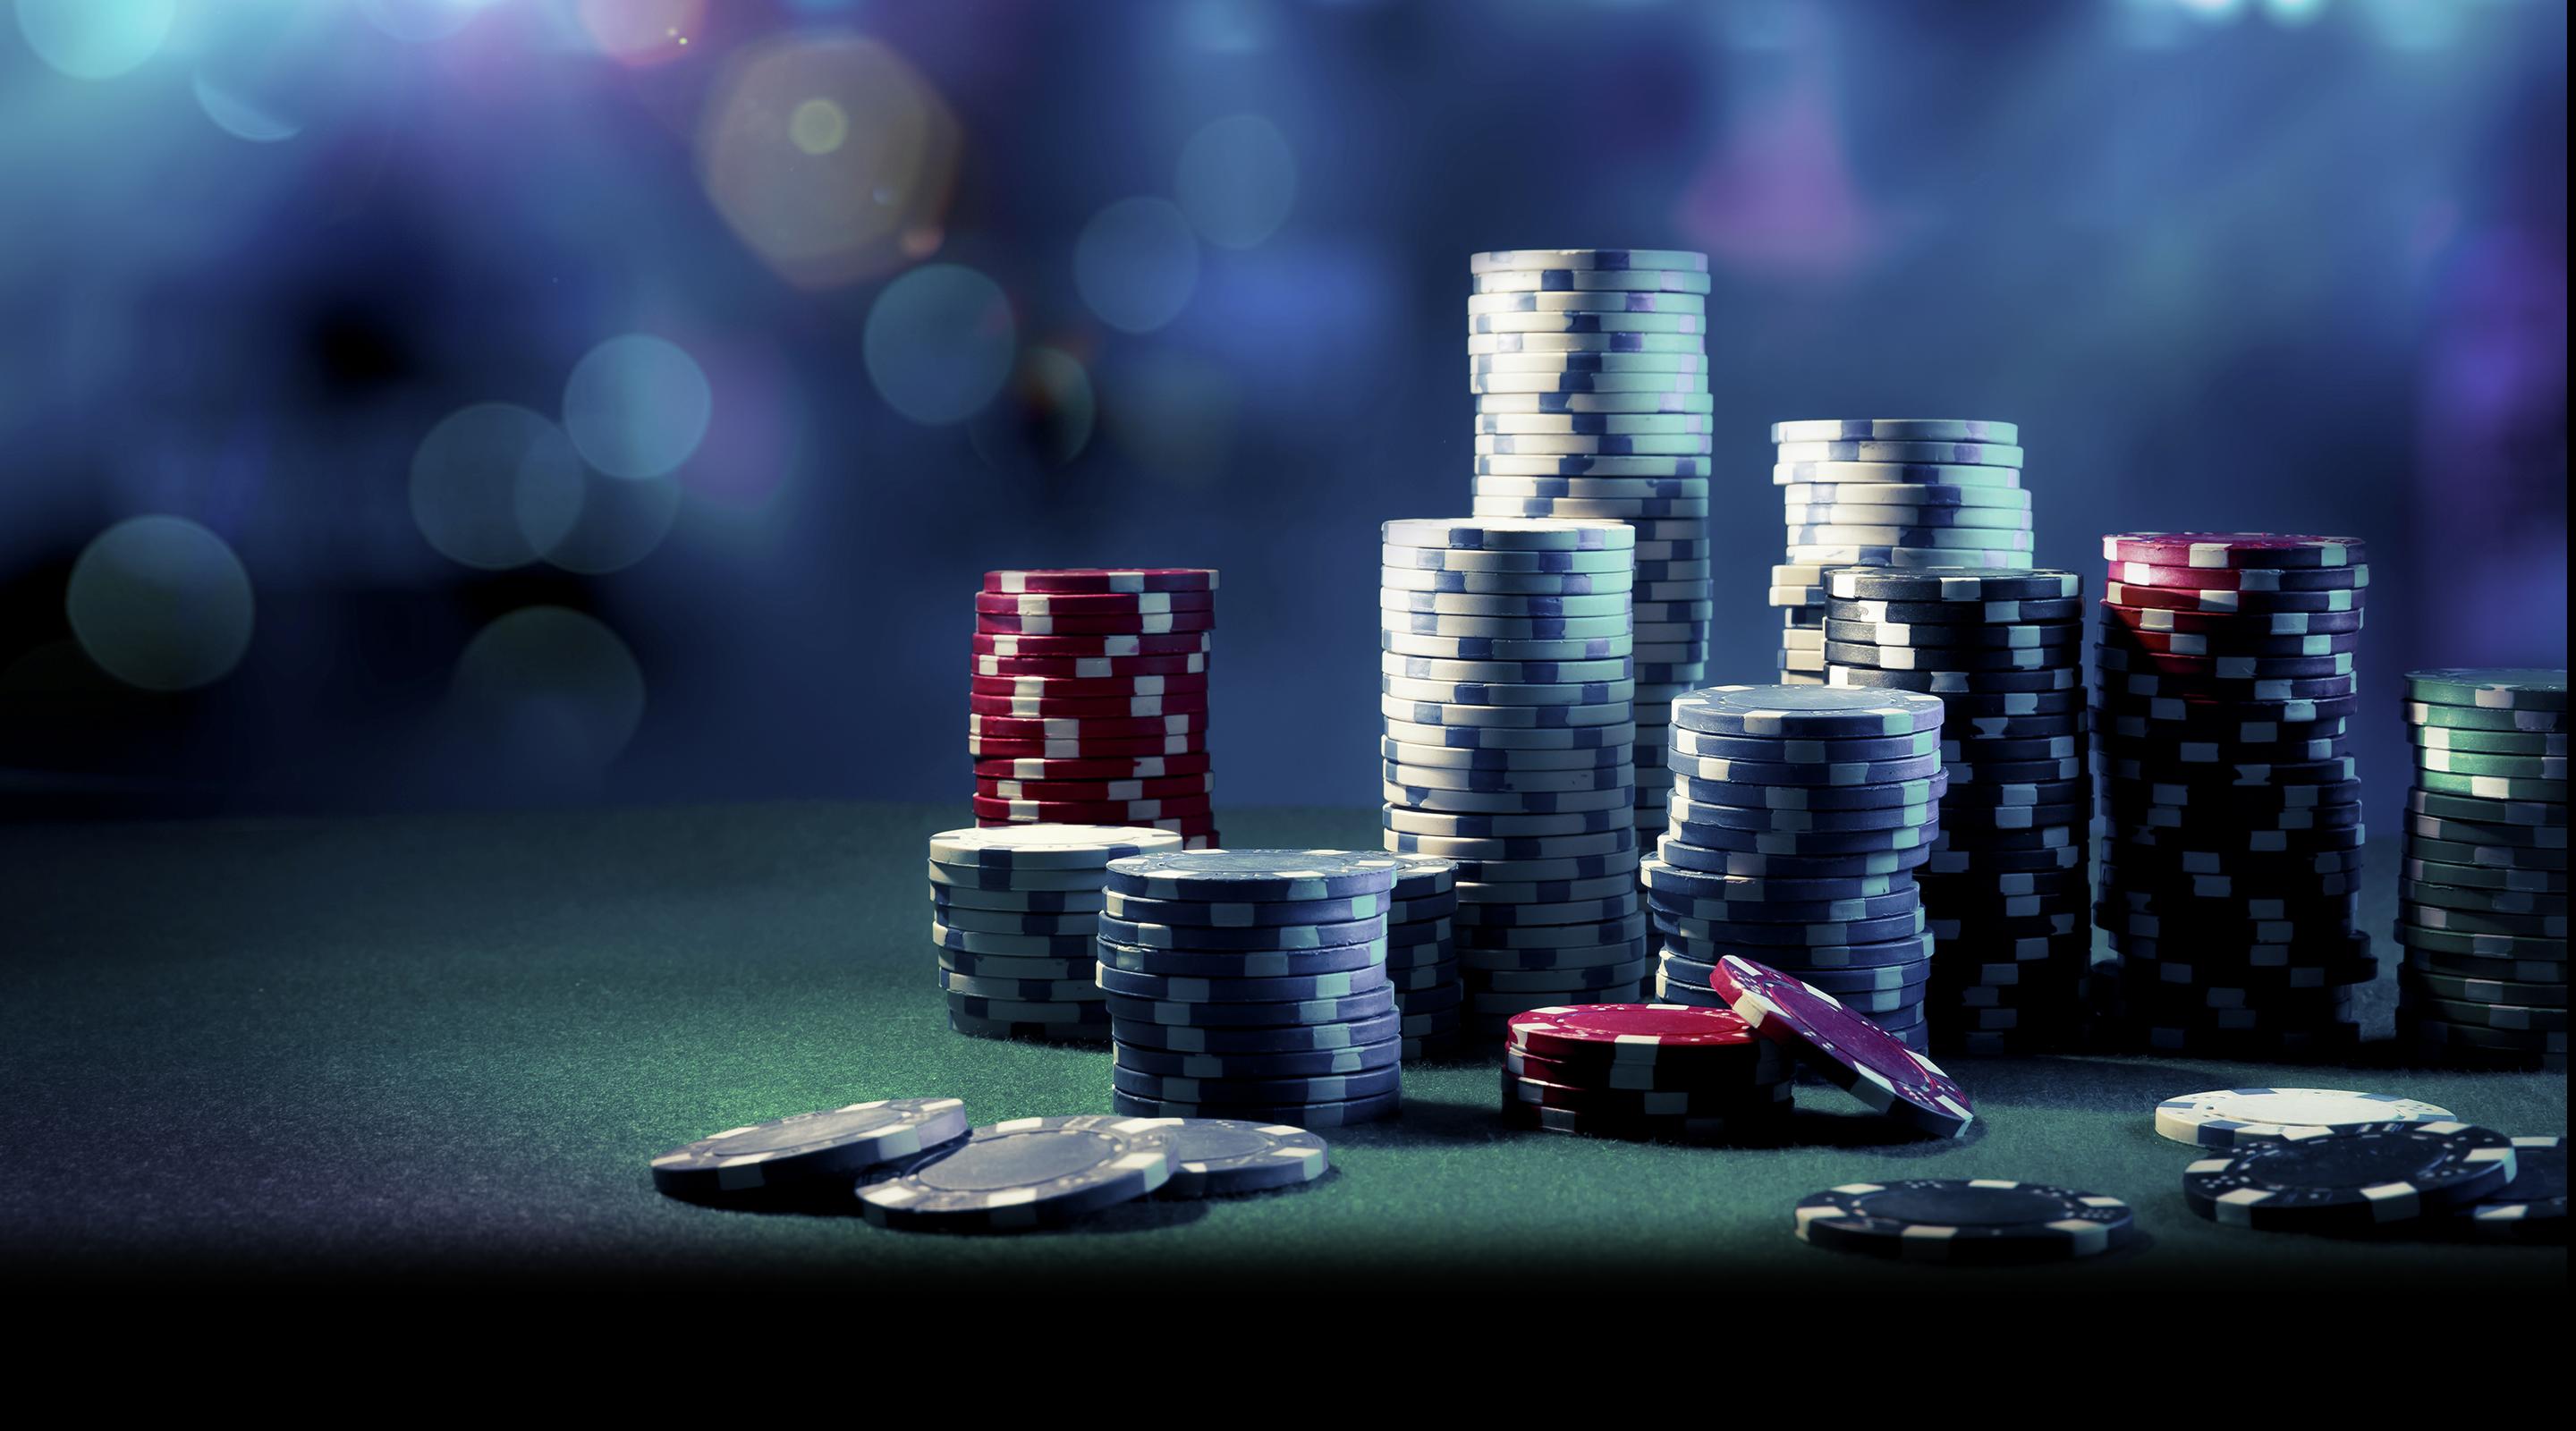 HD Quality Wallpaper | Collection: Game, 2880x1600 Poker